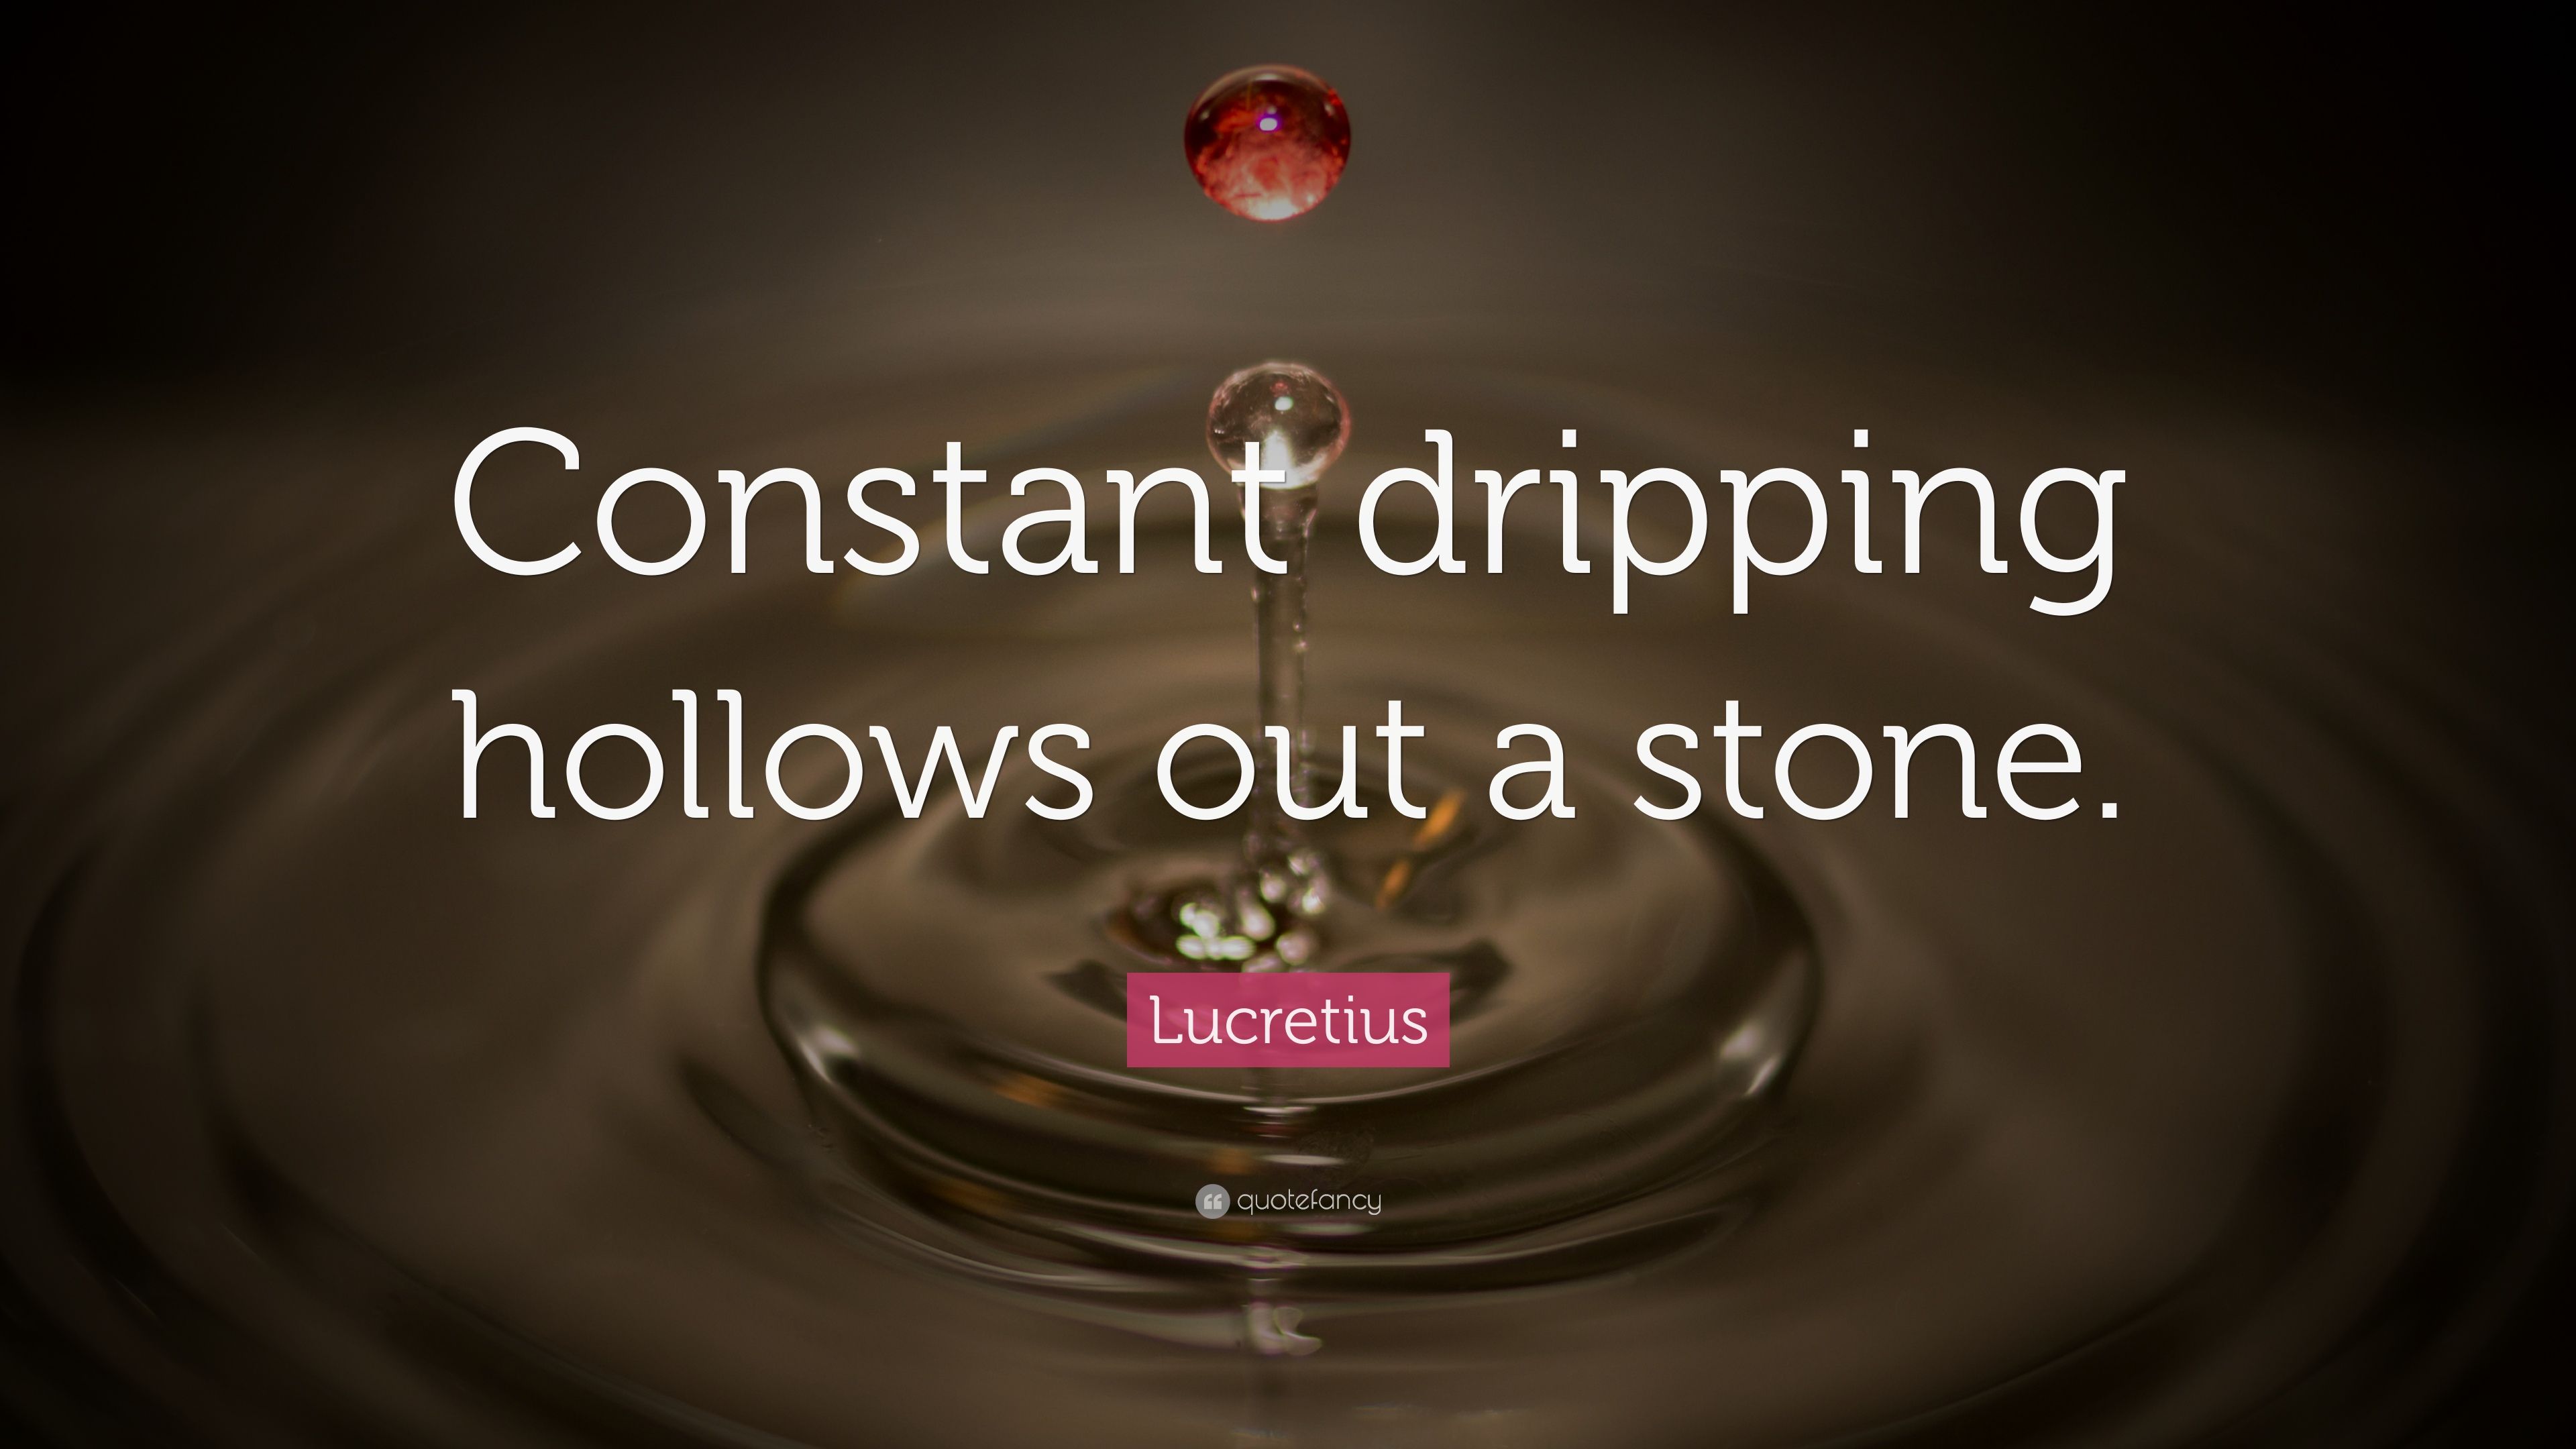 Lucretius Quote: “Constant dripping hollows out a stone.” 16